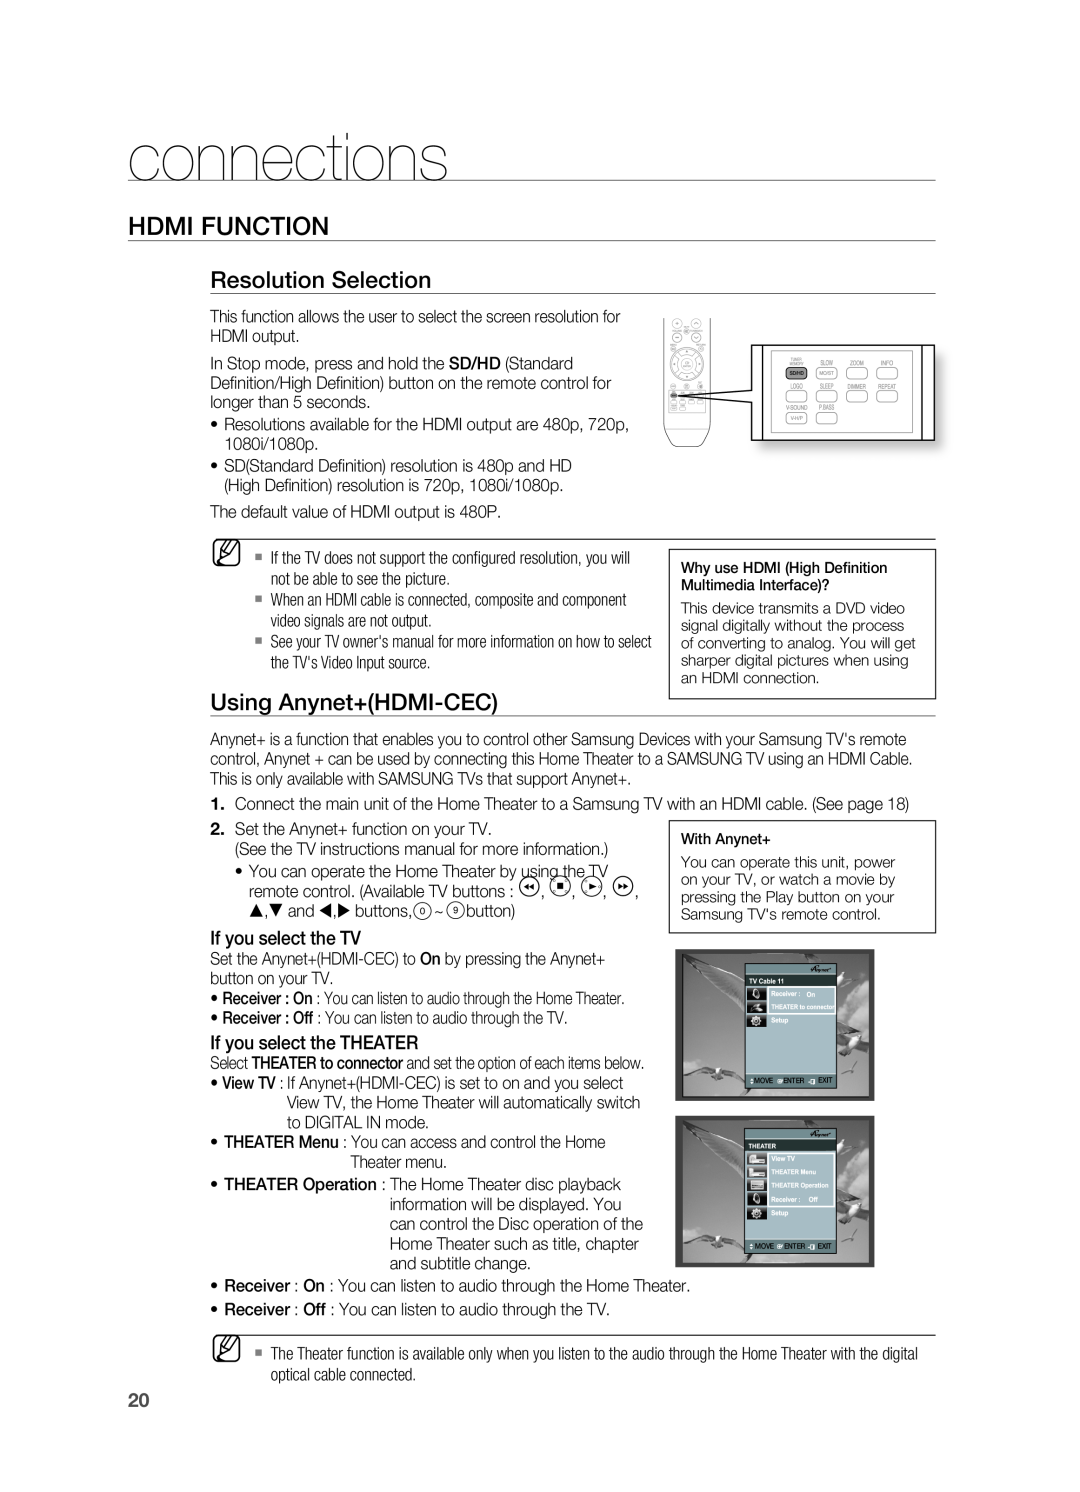 Samsung HT-A100 user manual Hdmi Function, resolution Selection, Using Anynet+HDMI-CEC, connections 